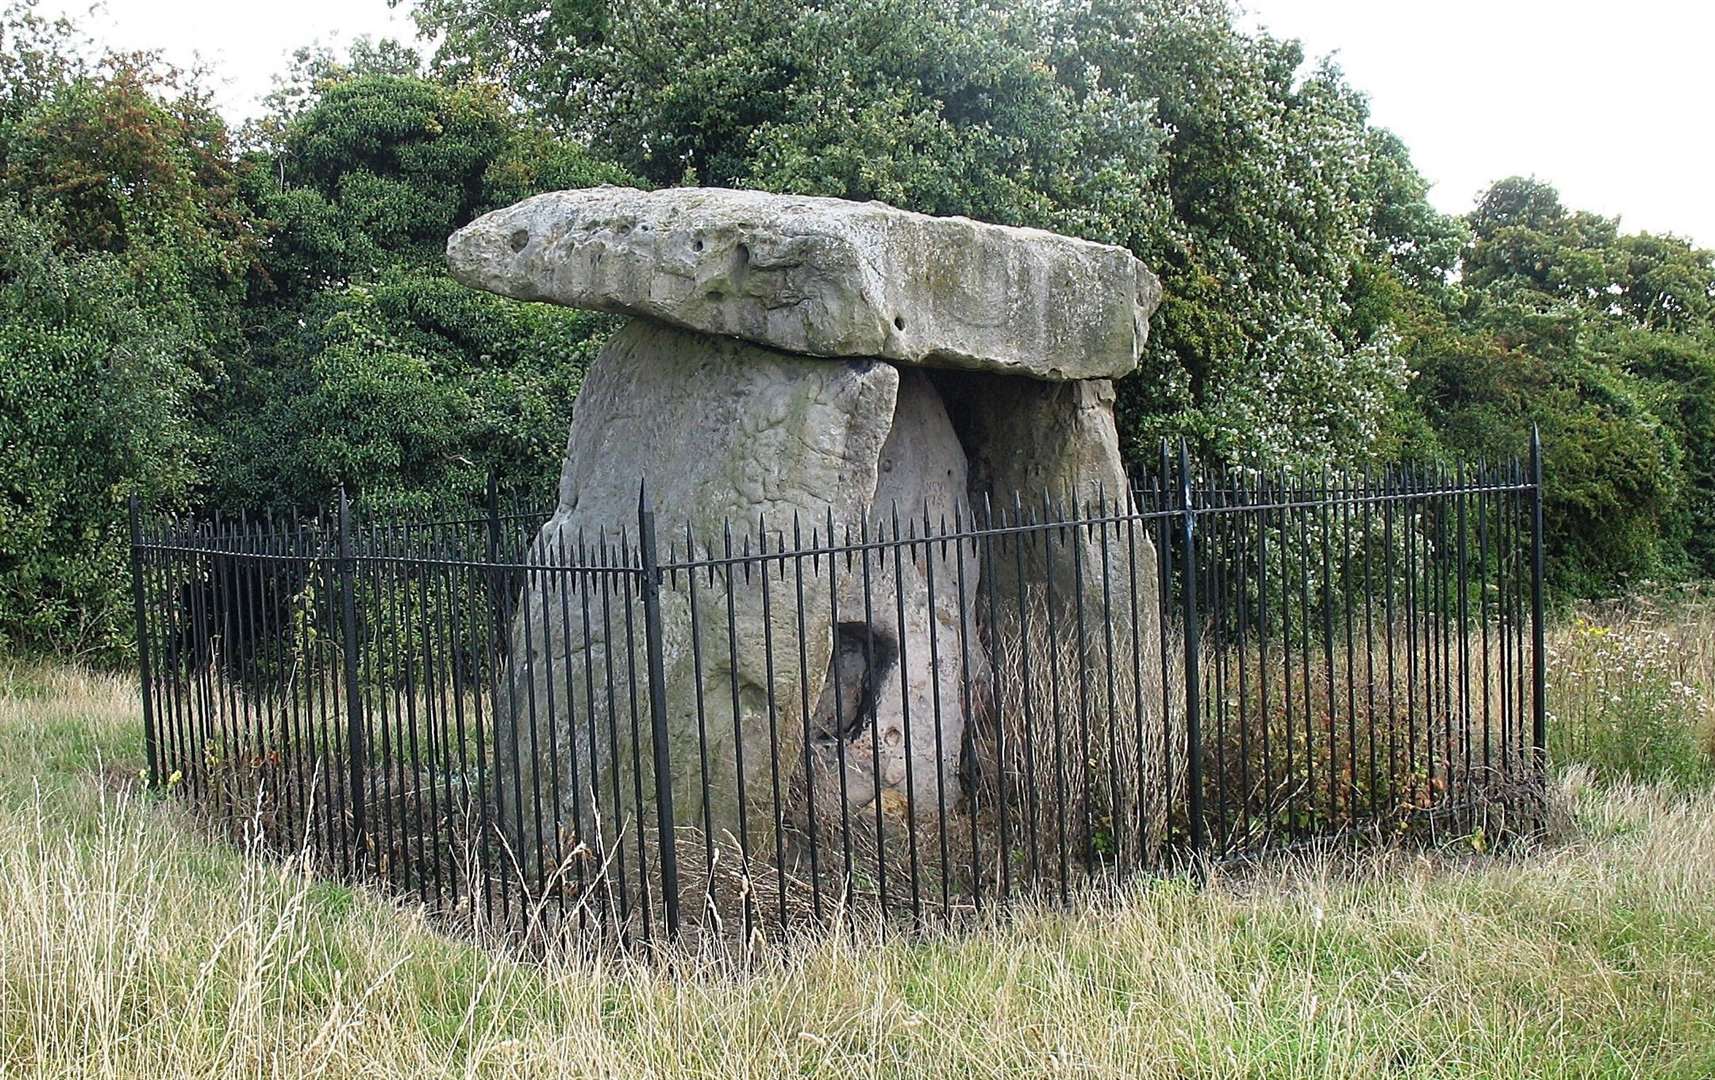 Kits Coty House. Kits Coty and other nearby monuments at Blue Bell Hill have been linked with mythic Saxon kings, but the stones date back to a far earlier time. Copyright: Kent Archeological Society, Paul Tritton